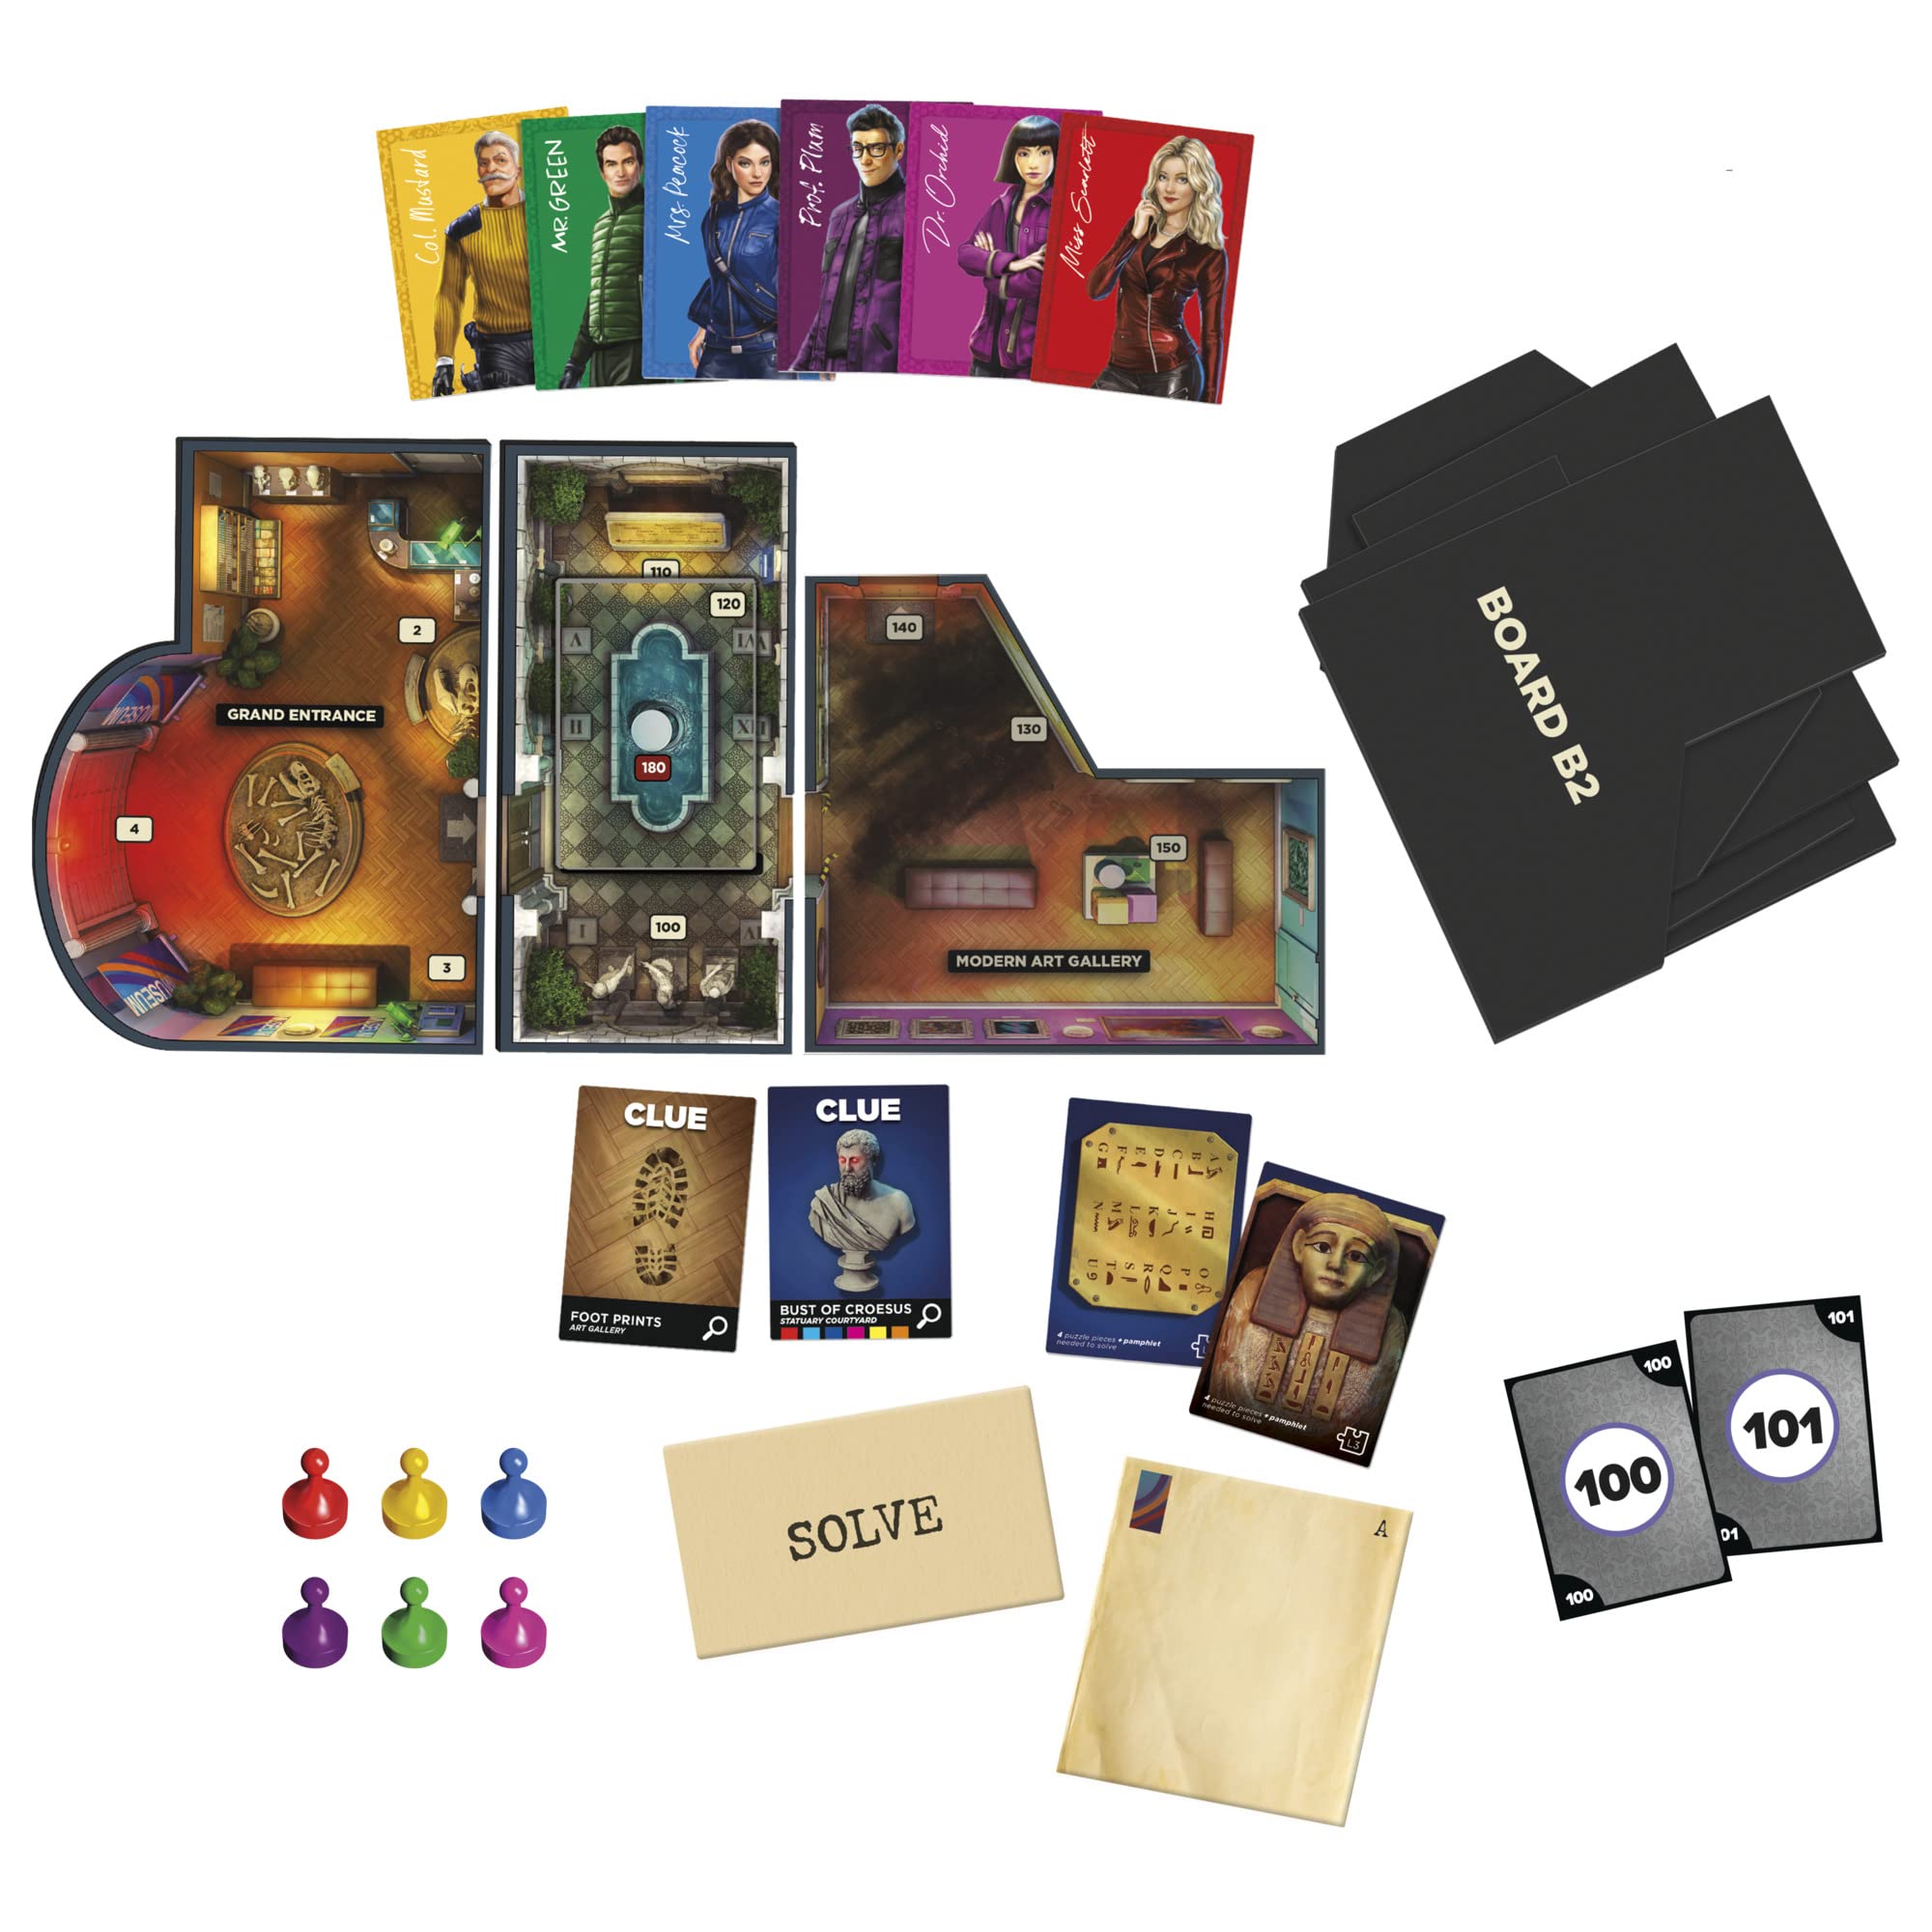 Clue Board Game Robbery at the Museum, Clue Escape Room Game, Murder Mystery Games, Cooperative Family Board Game, Ages 10 and up, 1-6 Players